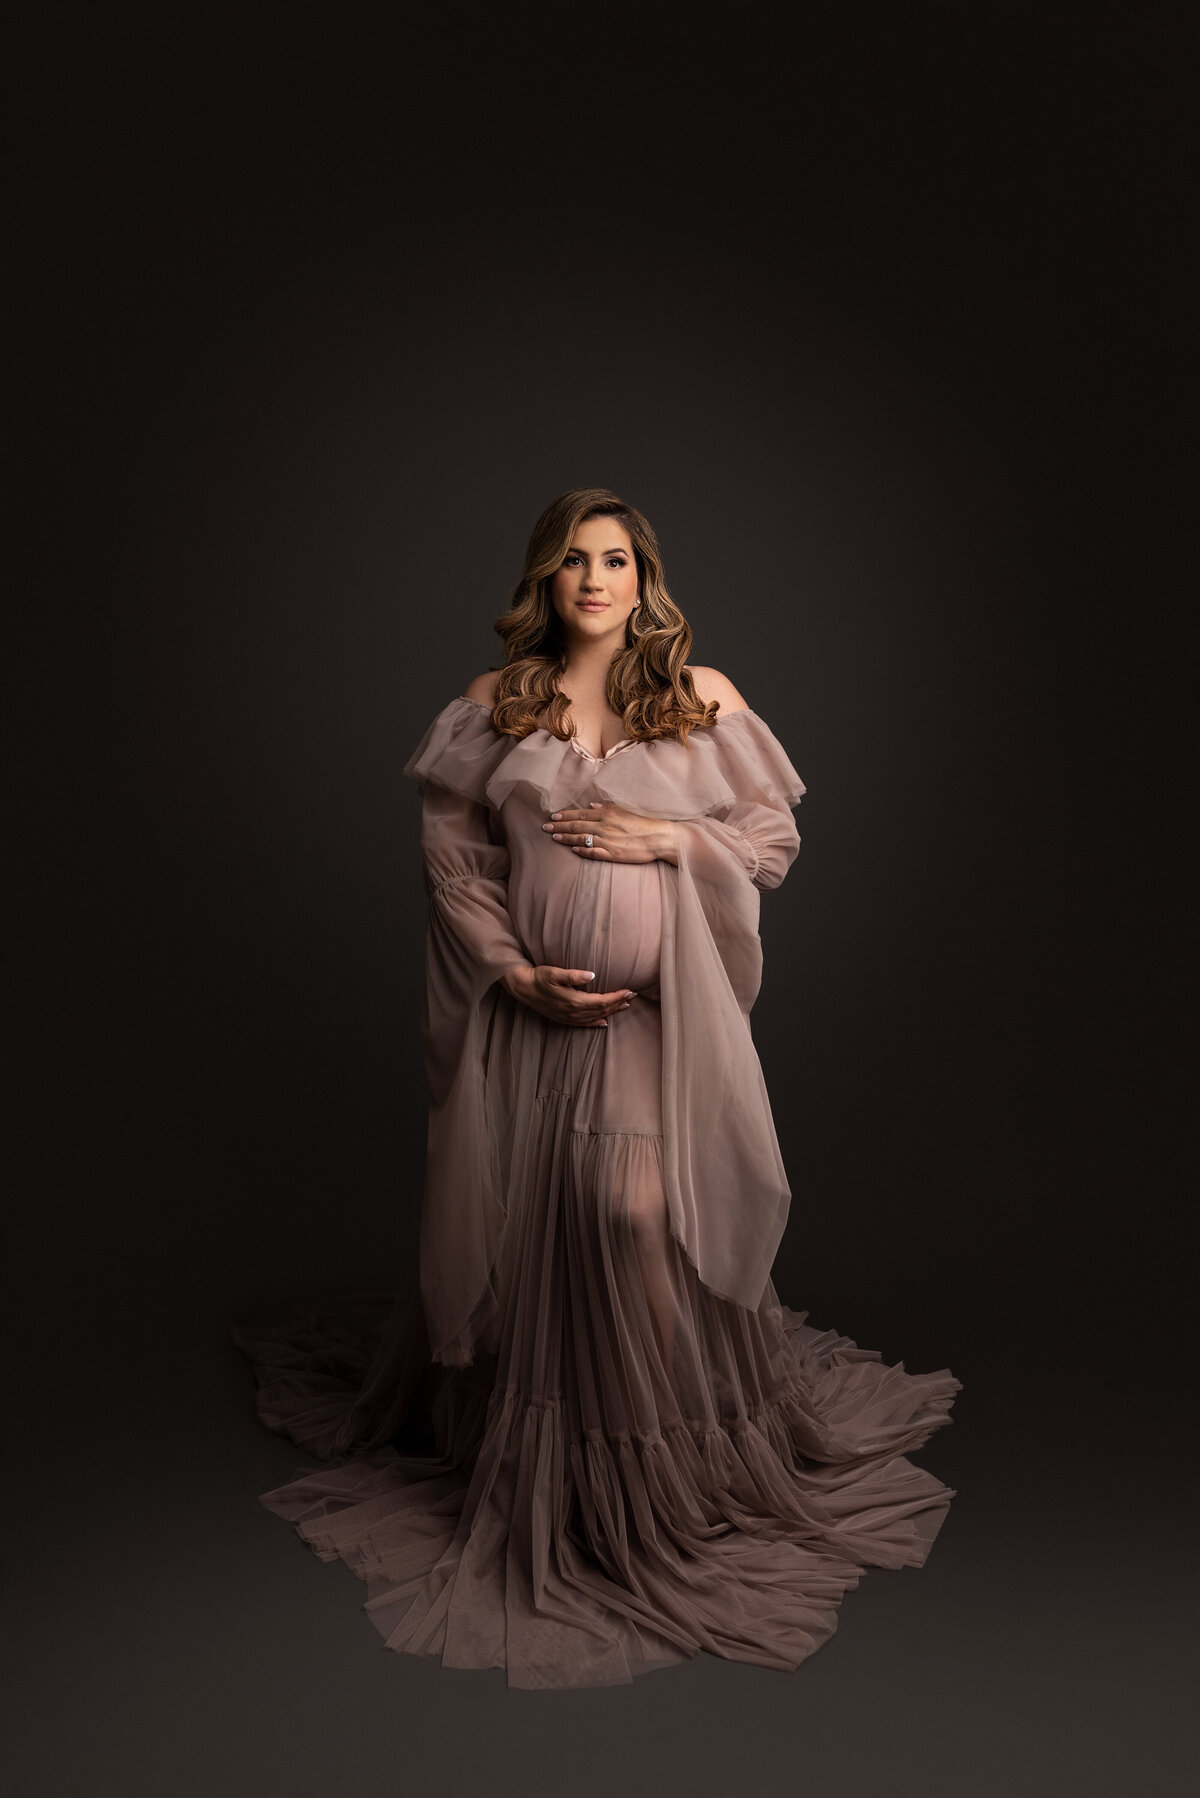 Maternity photo by Katie Marshall, Philadelphia Main Line's best maternity photographer. Woman in long organza blushy-taupe gown against dark grey backdrop, one hand above her bump, curled hair cascading over shoulders, closed-mouth smile, looking at the camera.